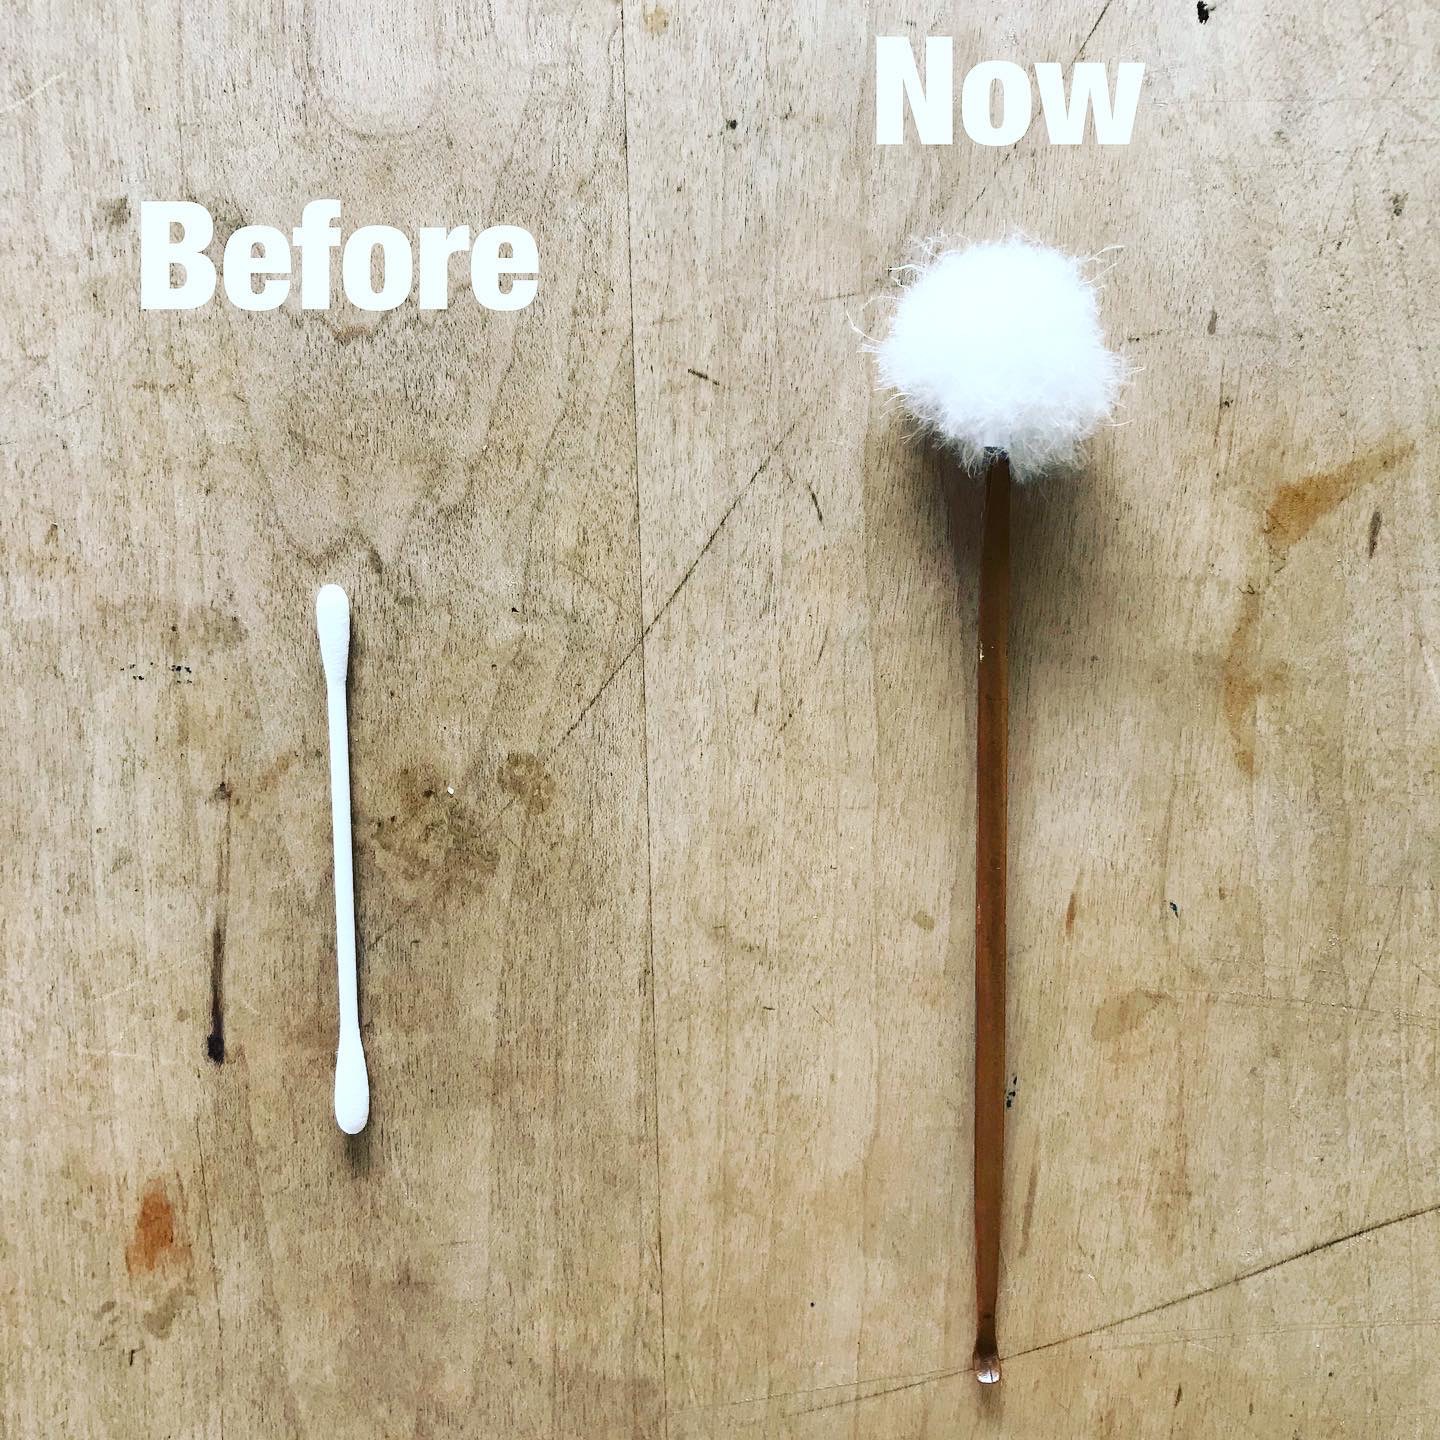 Before→I used to throw away so many q-tips? Now→I always use this Japanese traditional wooden earpick ! It is sturdy and do the job?